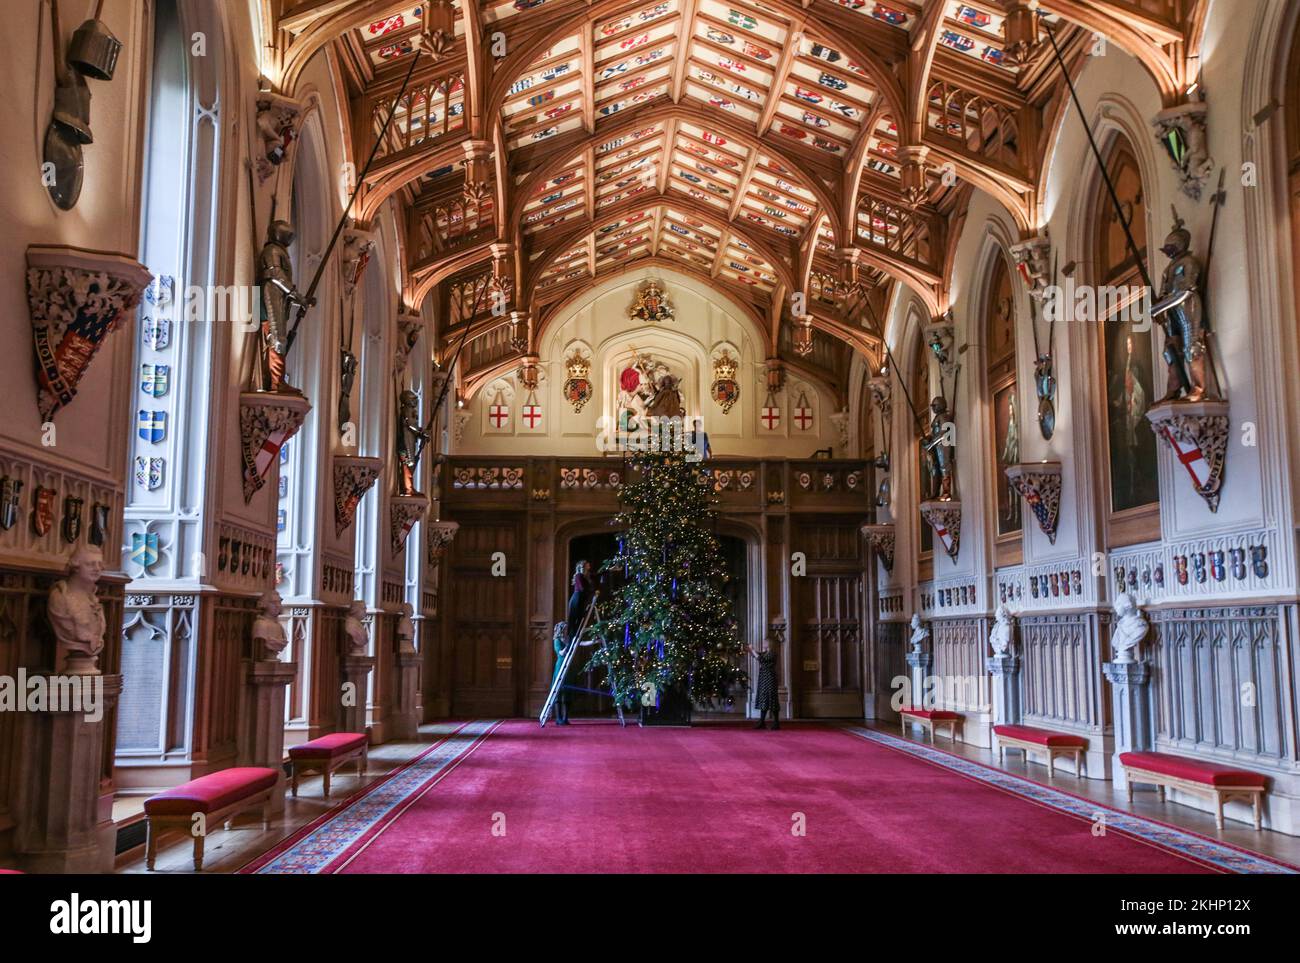 Windsor, Berkshire, UK  24 November 2022  Windsor Castle unveiled the Christmas decorations with a 20-foot-high Nordmann Fir tree standing at the end of St George's Hall, felled from nearby Windsor Great Park and dressed with hundreds of iridescent ornaments. Credit: Paul Quezada-Neiman/Alamy Live News Stock Photo